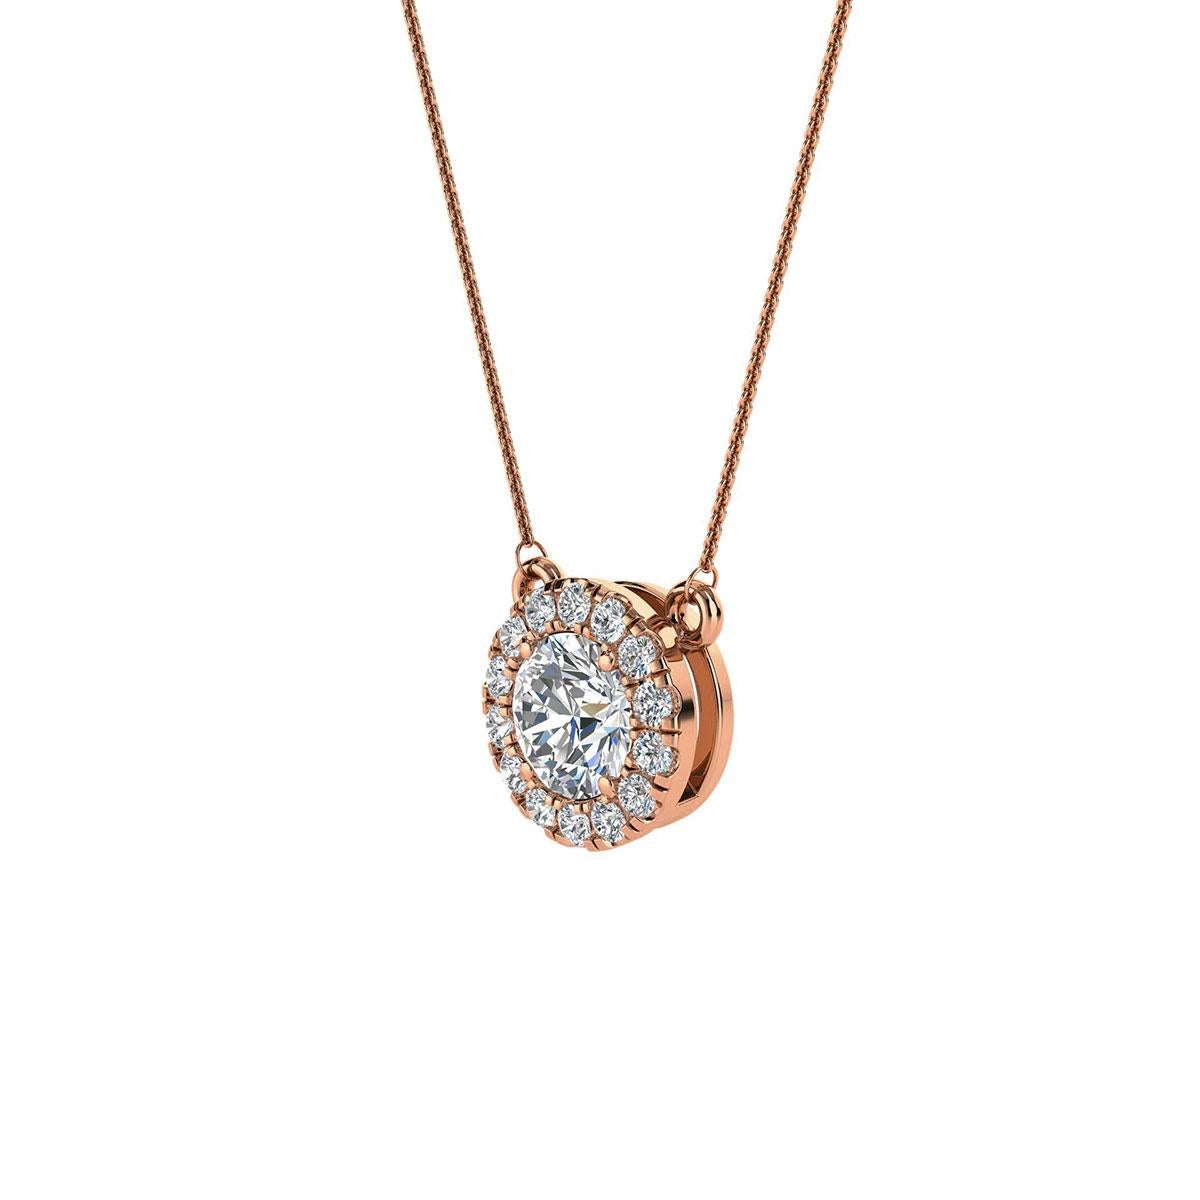 This delicate pendant feature one round shaped diamond that is approximately 0.35-carat total weight (4.5 mm) encircled by a halo of perfectly matched 14 brilliant round diamonds in about 0.14-carat total weight. The earrings are measuring at 7.5 mm